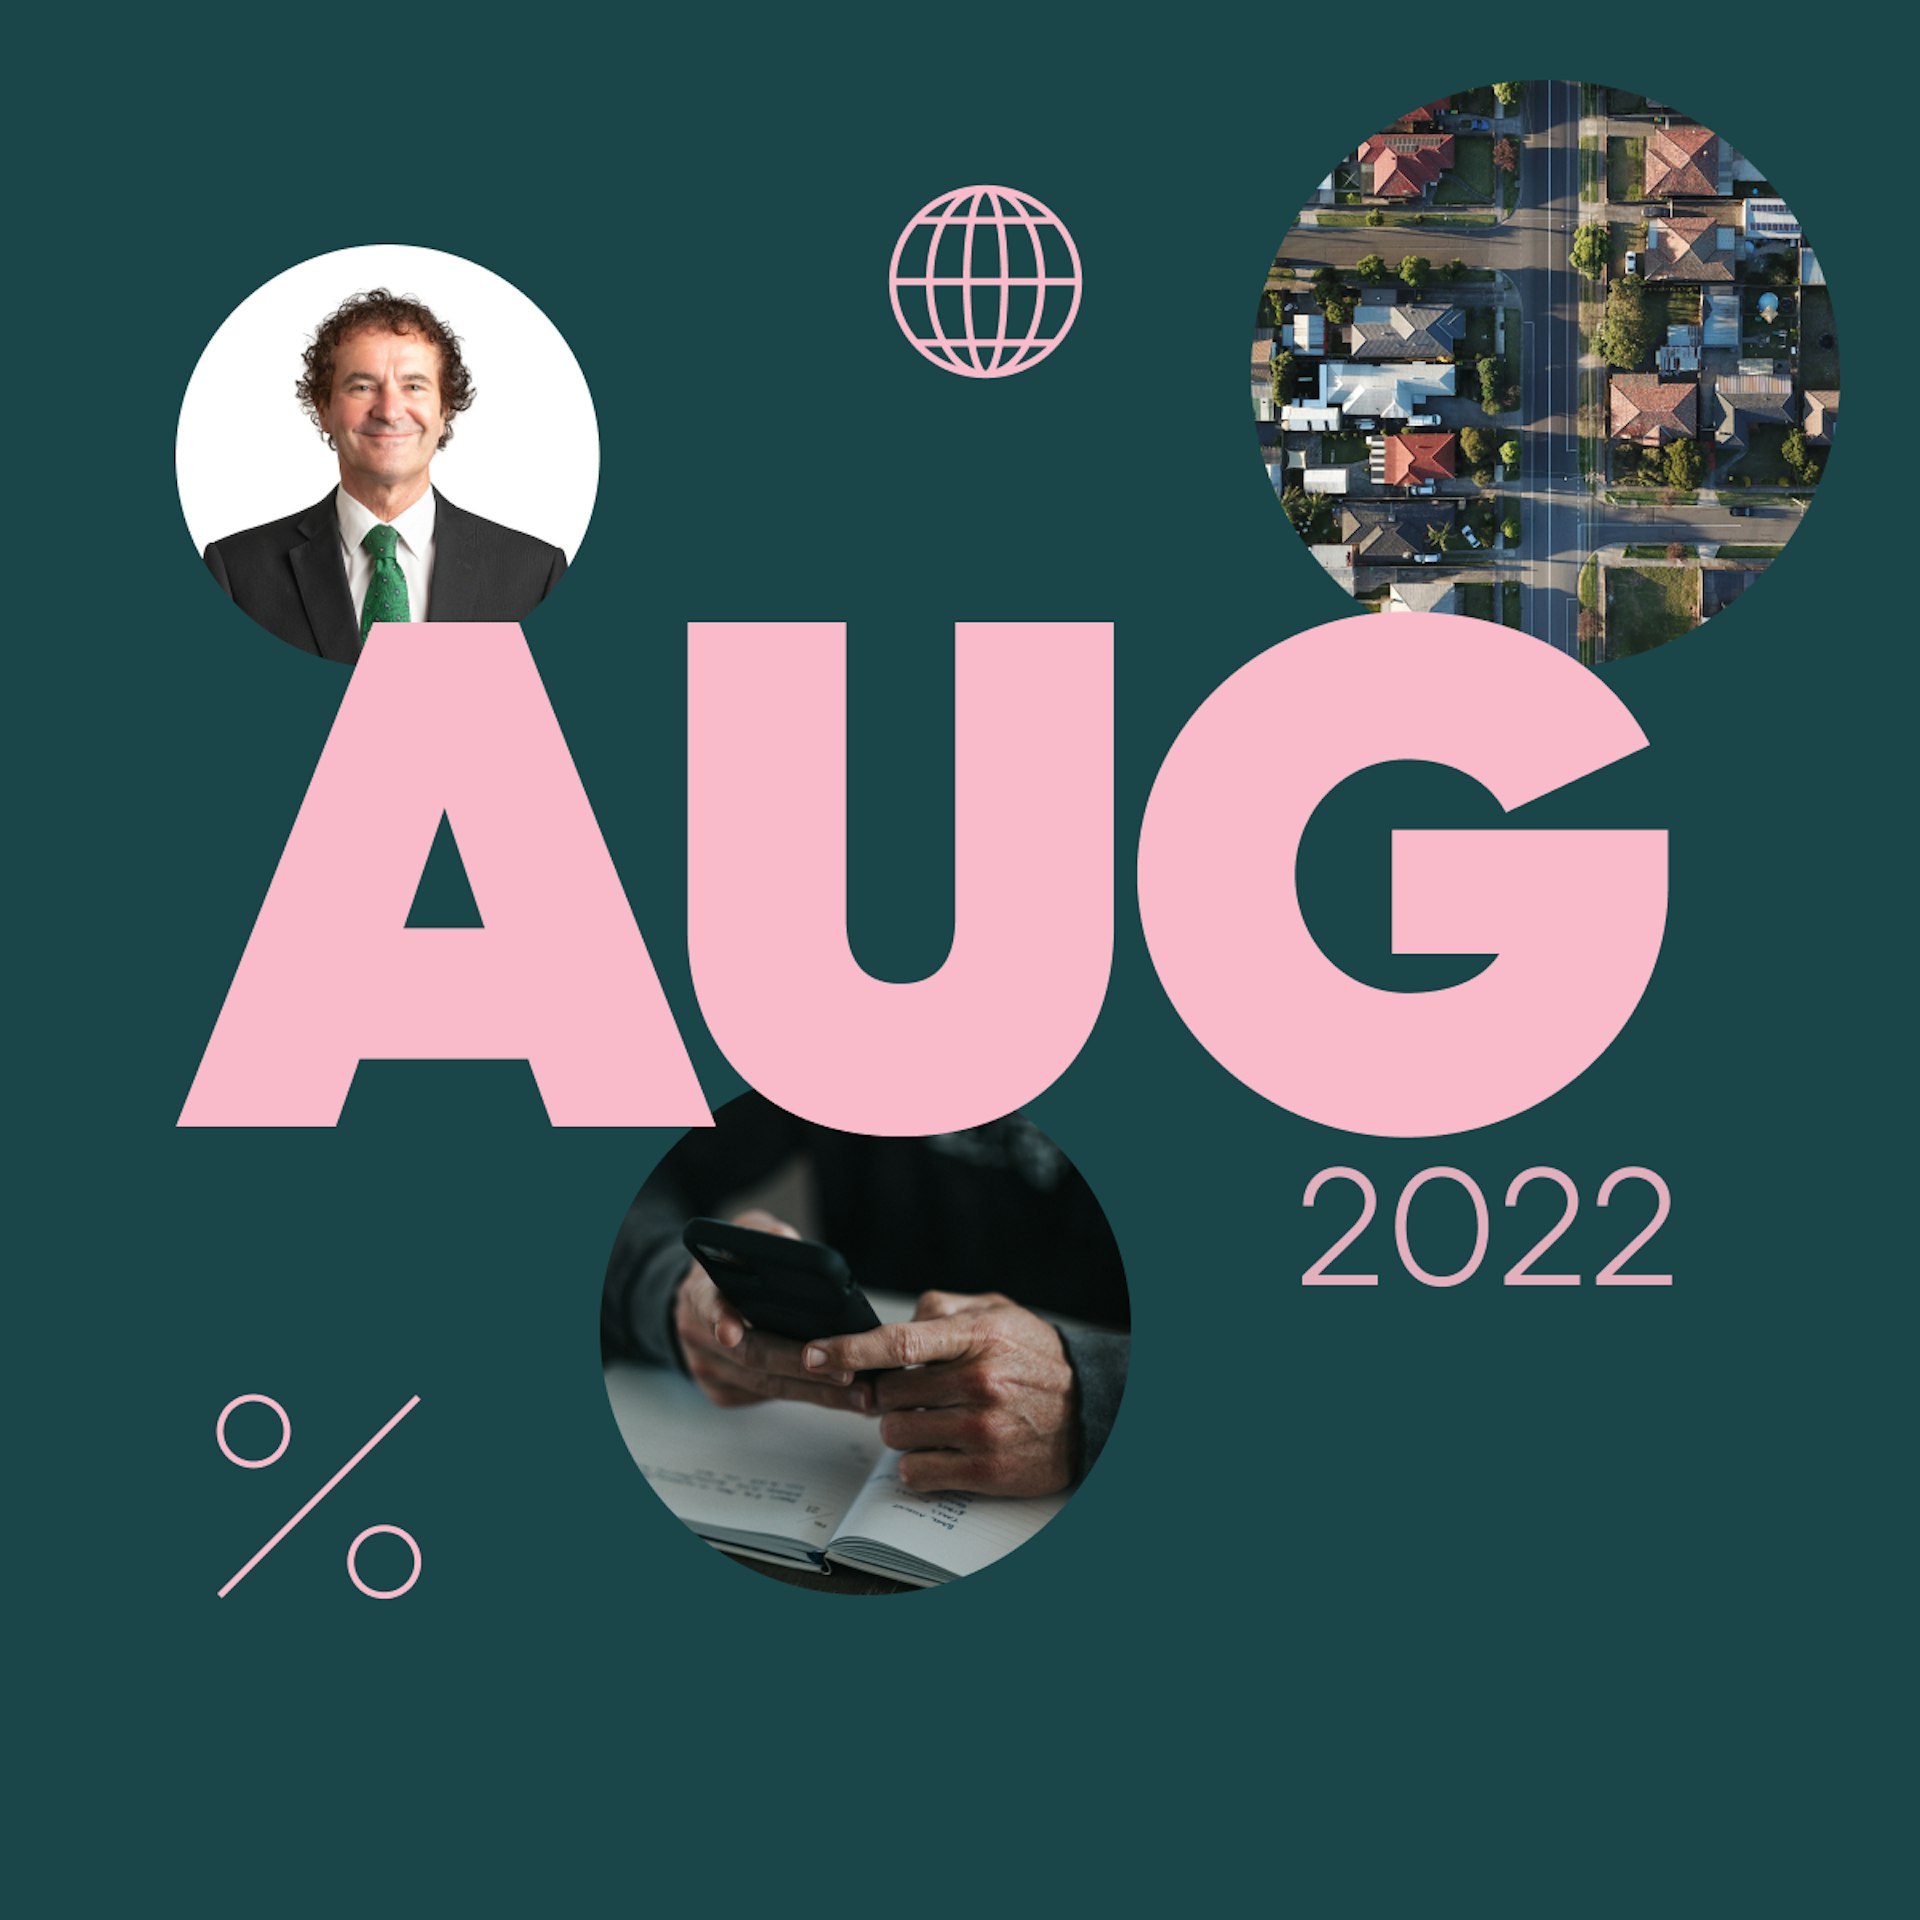 The header image for Tony Alexander's Investing Insights survey for August 2022. "Aug 2022" is in large pink text in the centre of the image, surrounded by a photo of Tony Alexander, a birds-eye photo of a residential street, and a close-up photo of two hands typing on a phone. 